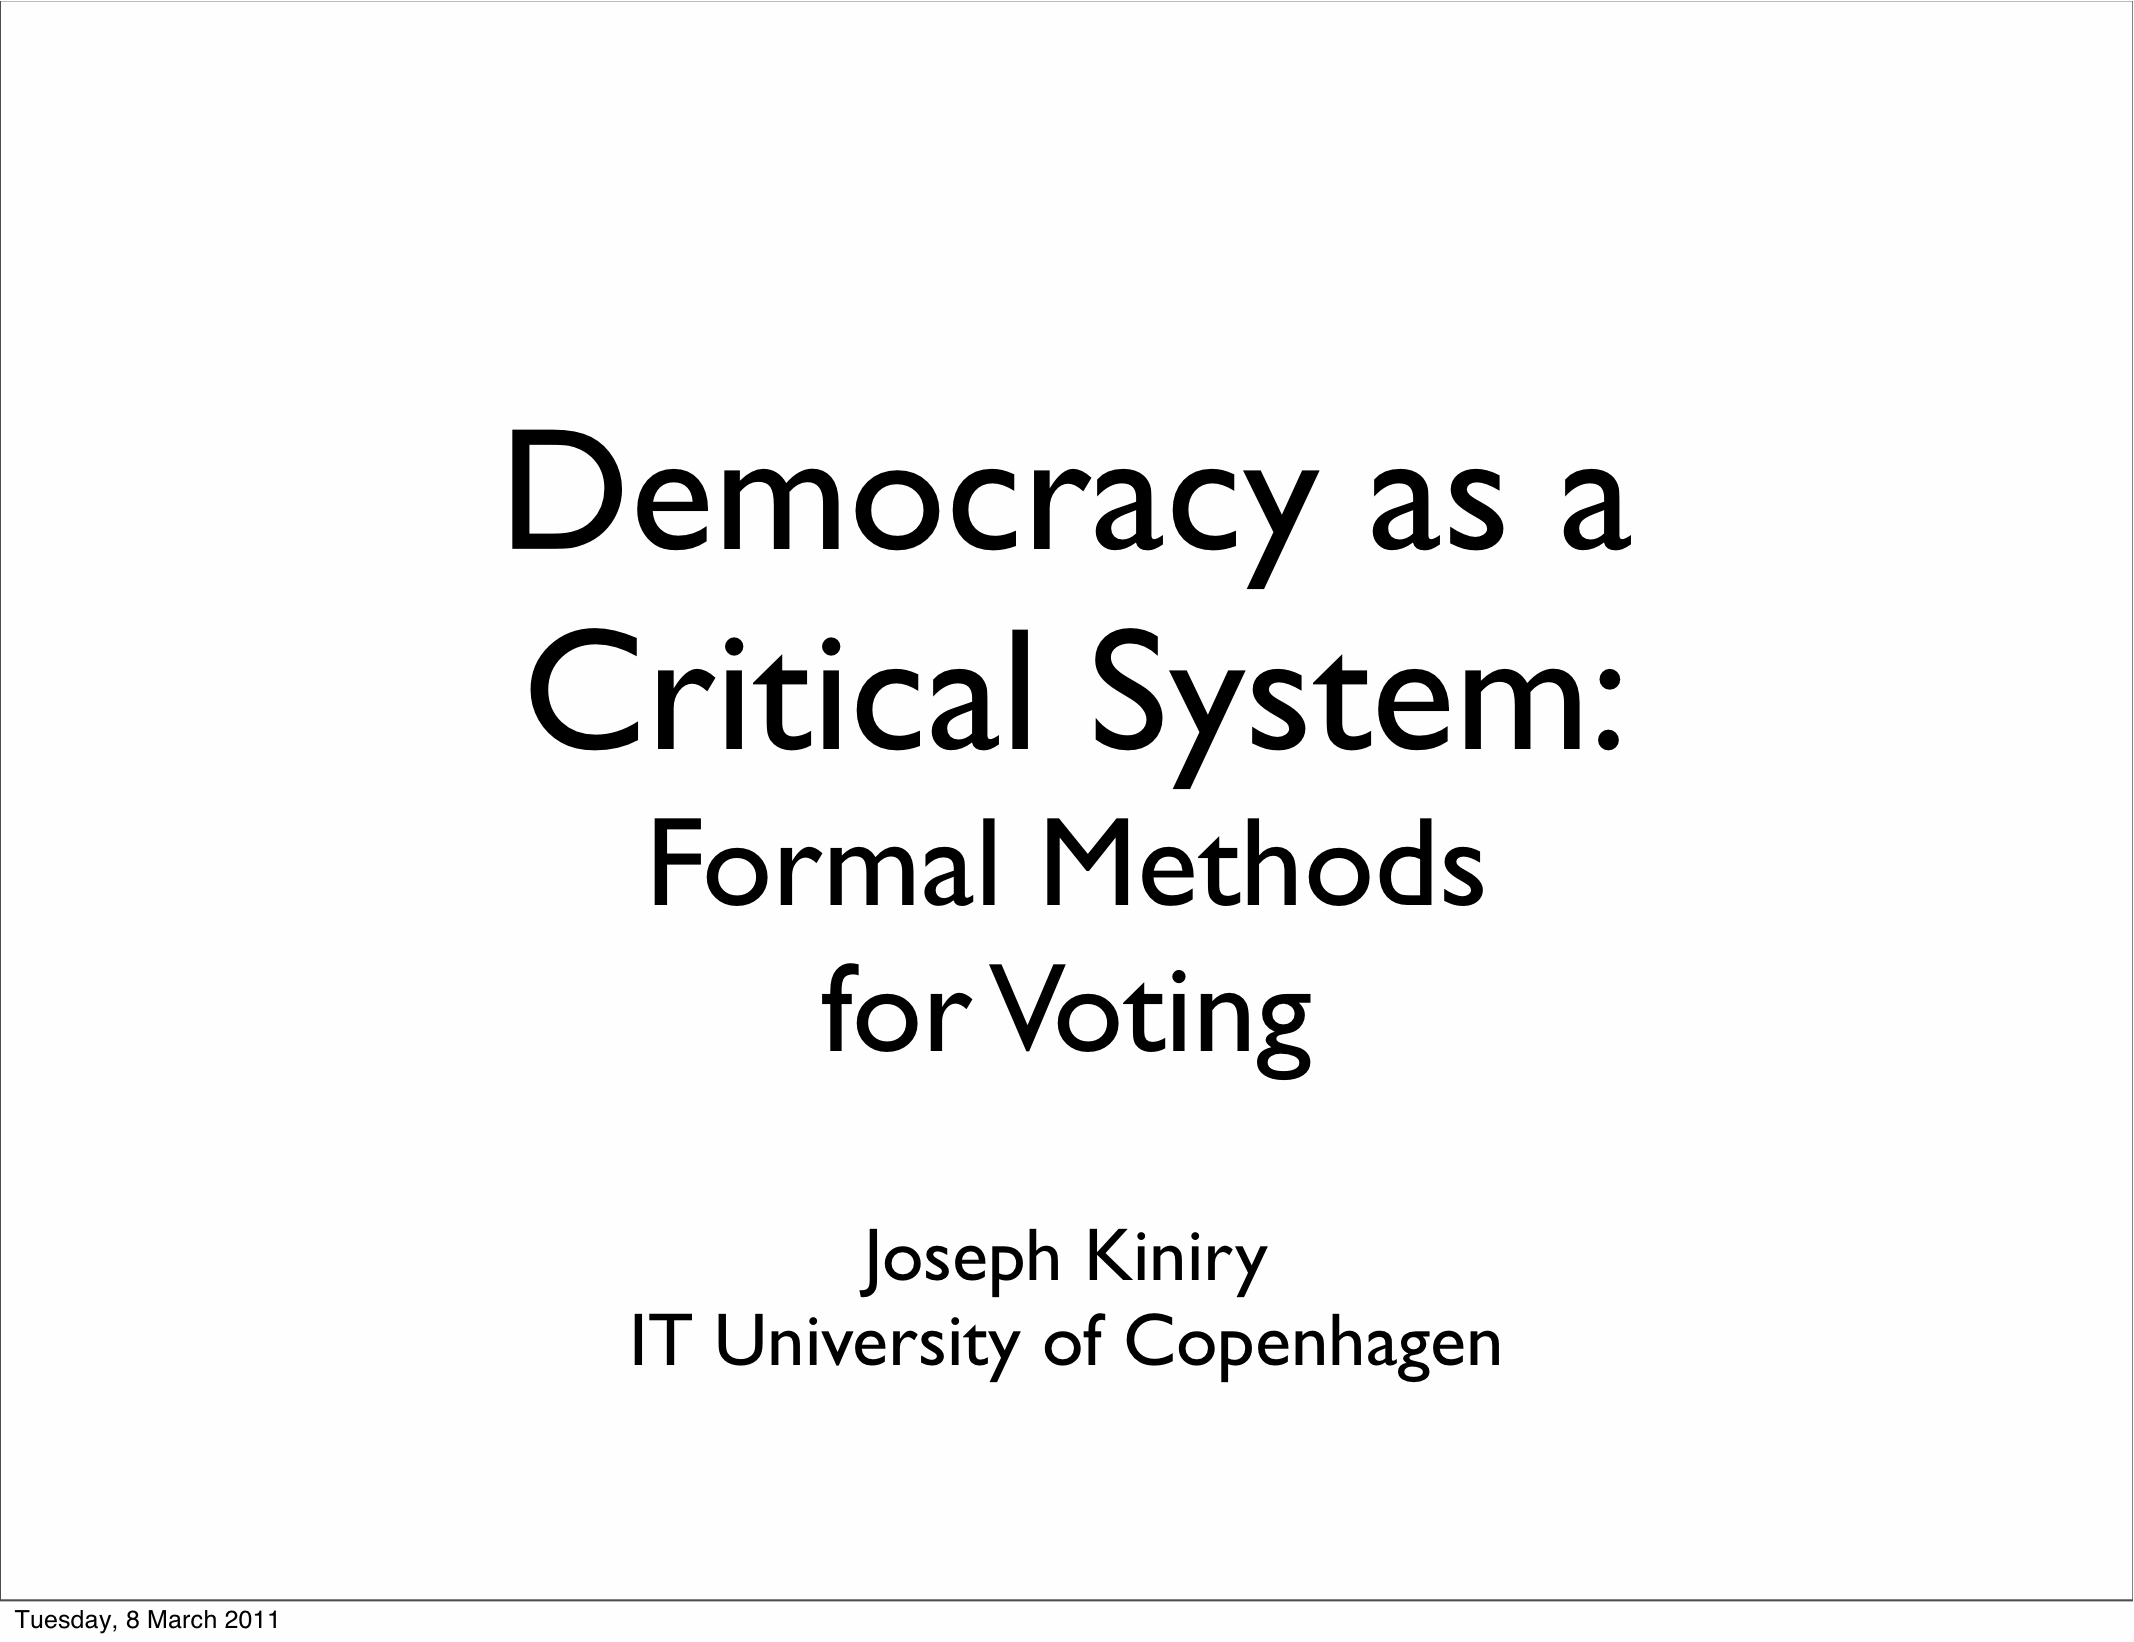 Democracy as a Critical System